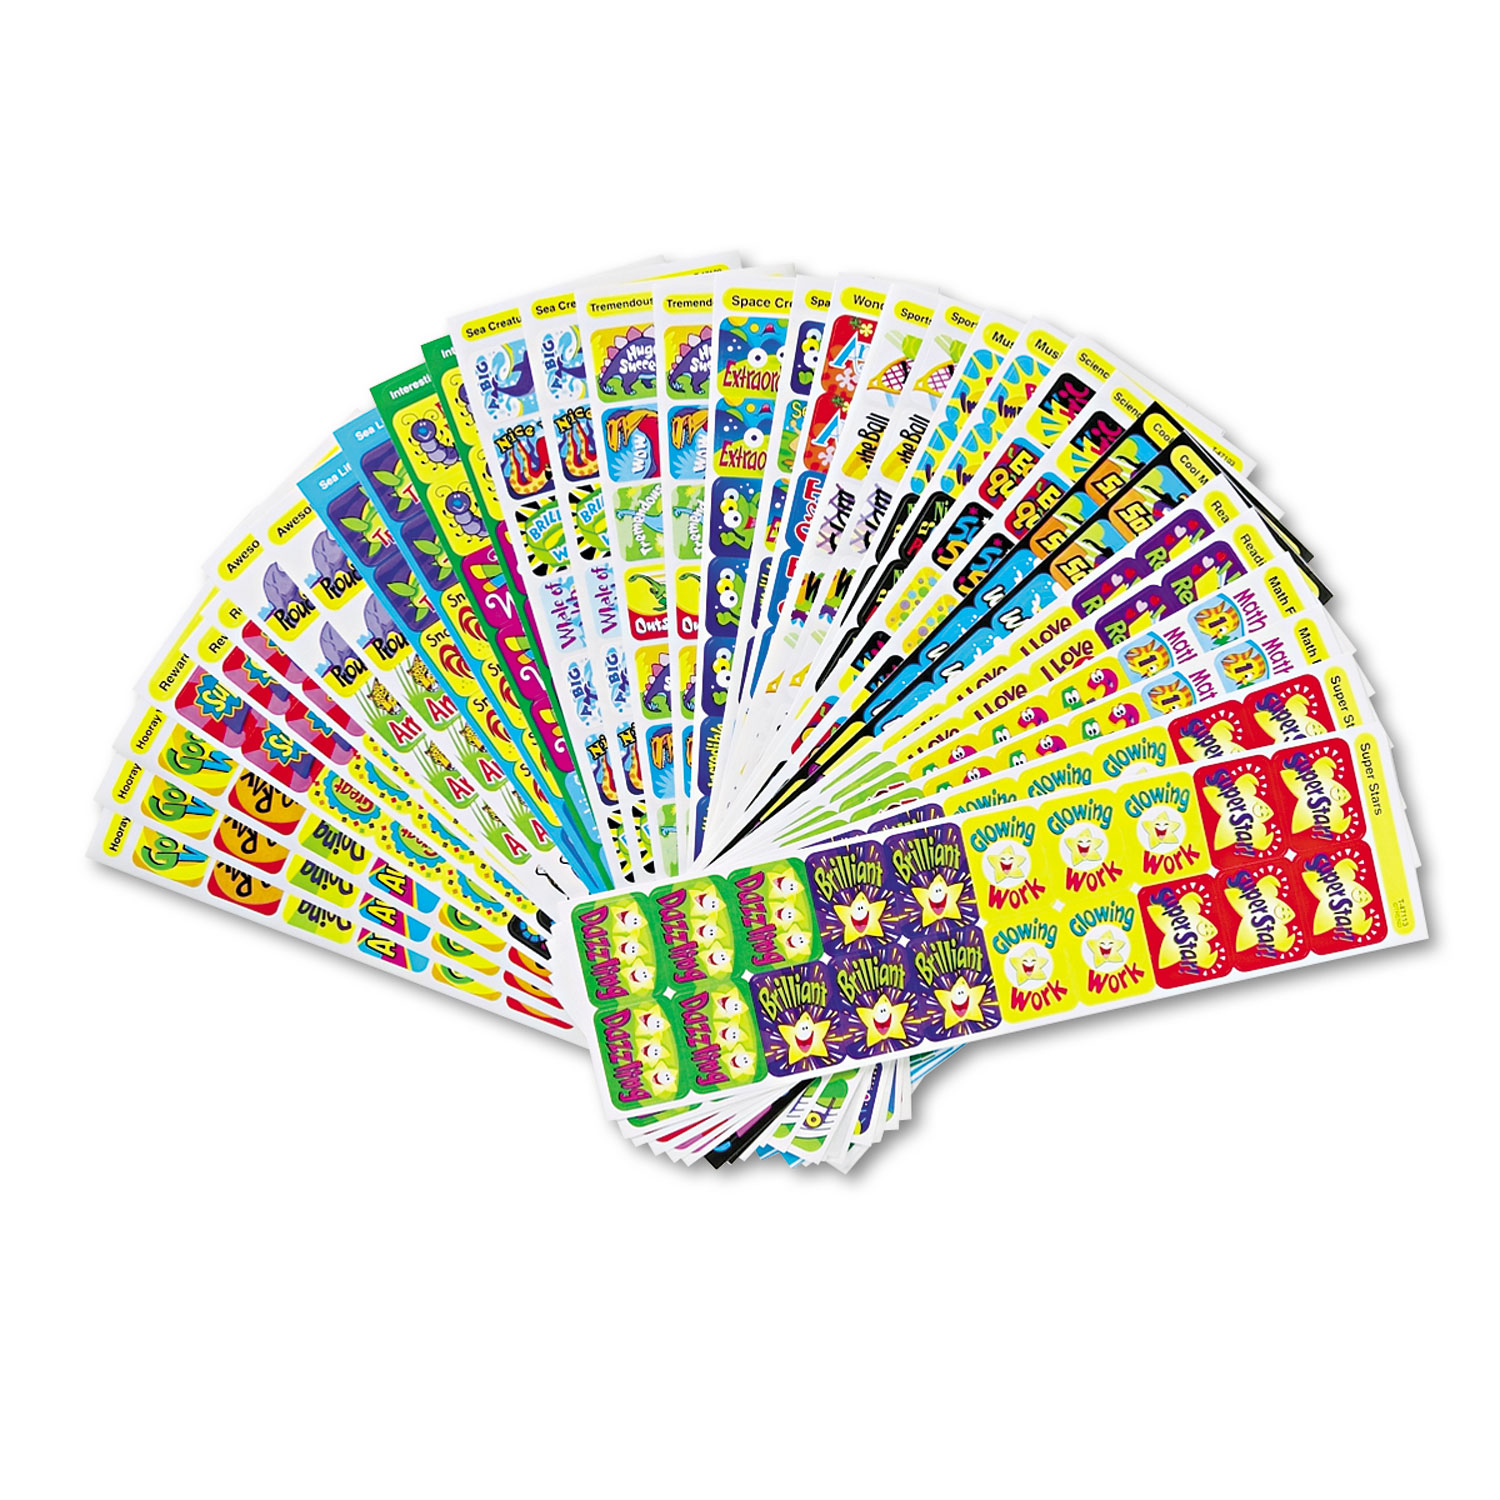 Applause Stickers Variety Pack, Great Rewards, 700/Pack